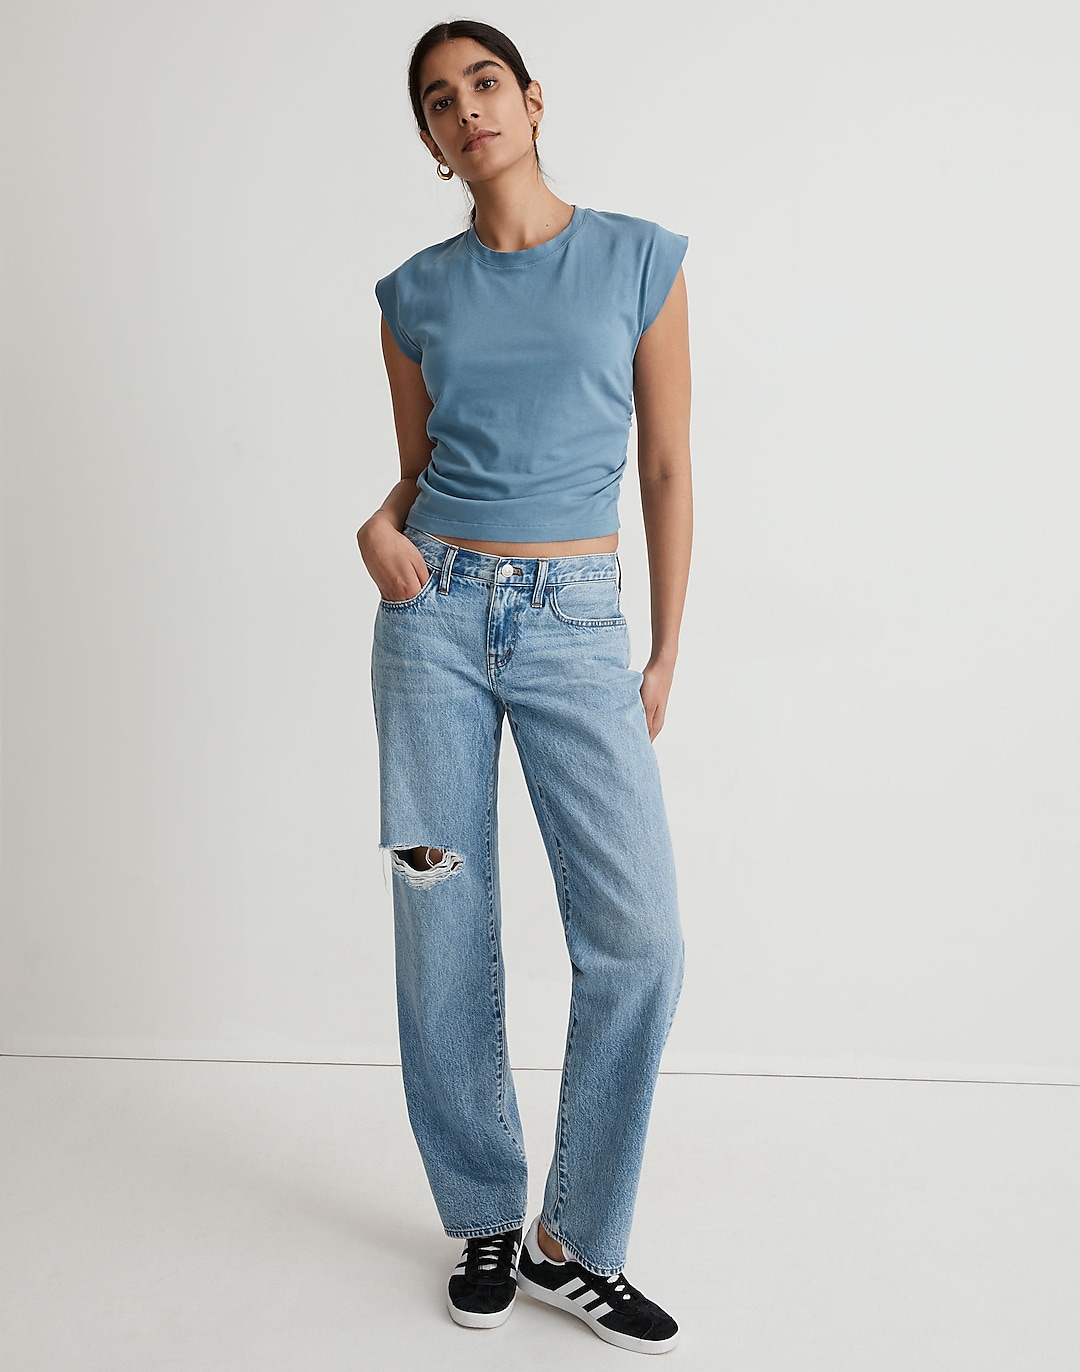 Low-Rise Baggy Straight Jeans in Heresford Wash | Madewell